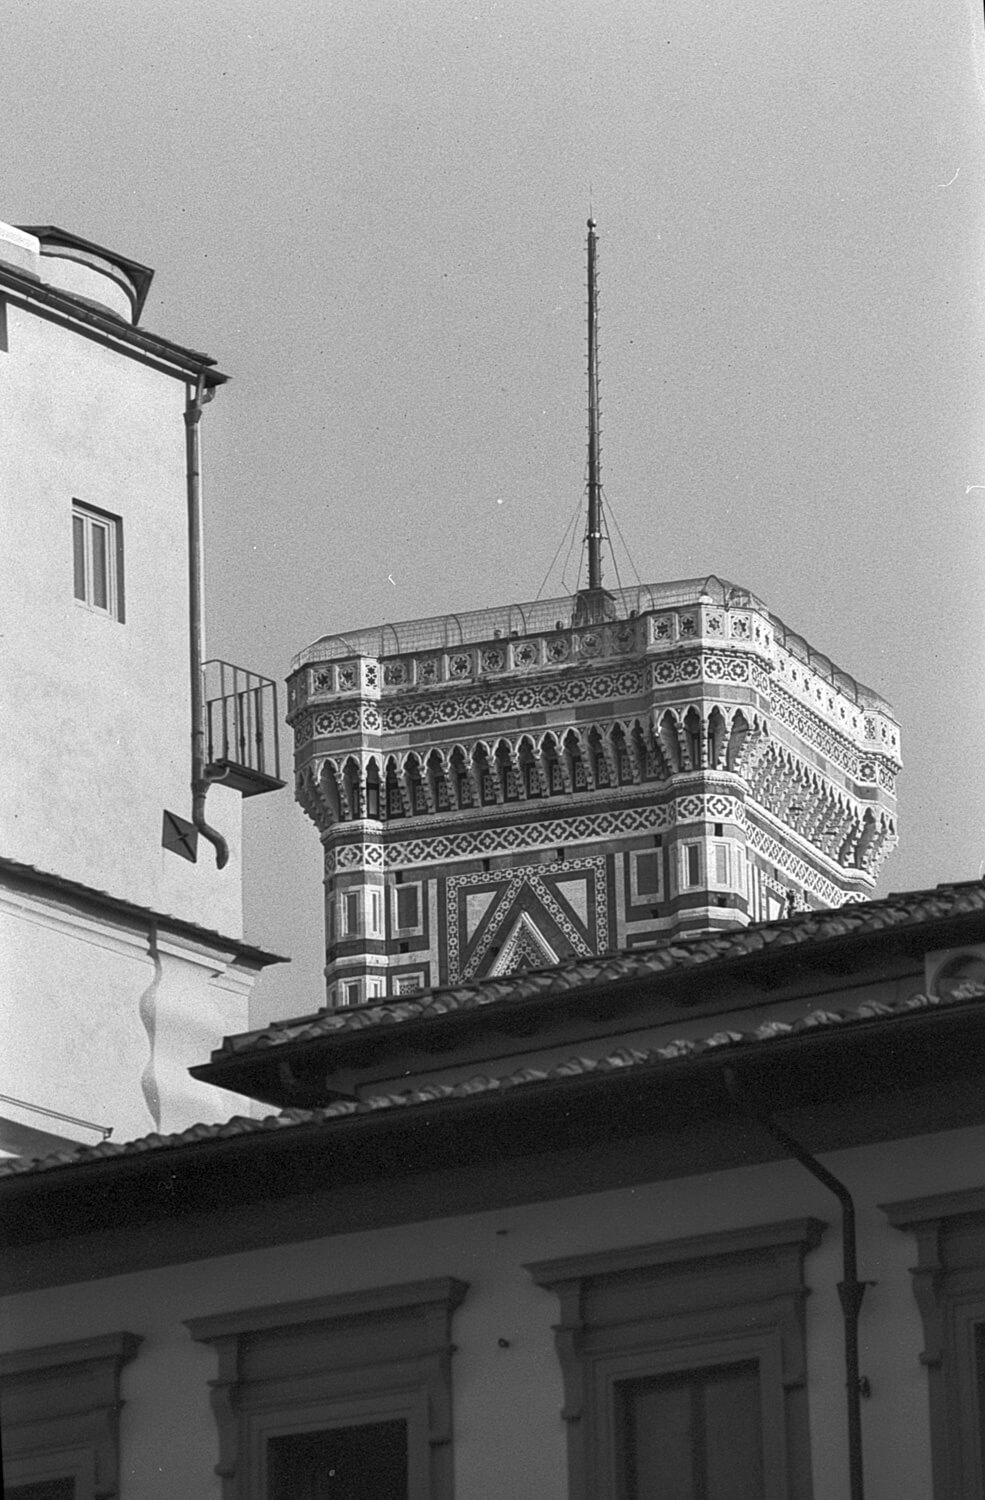 5 Frames... Of Orwo UN54 in Florence on a Canon FTb (35mm Format / EI 160 / Canon FD 70-210mm f/4.0 zoom lens - by Sergio Palazzi